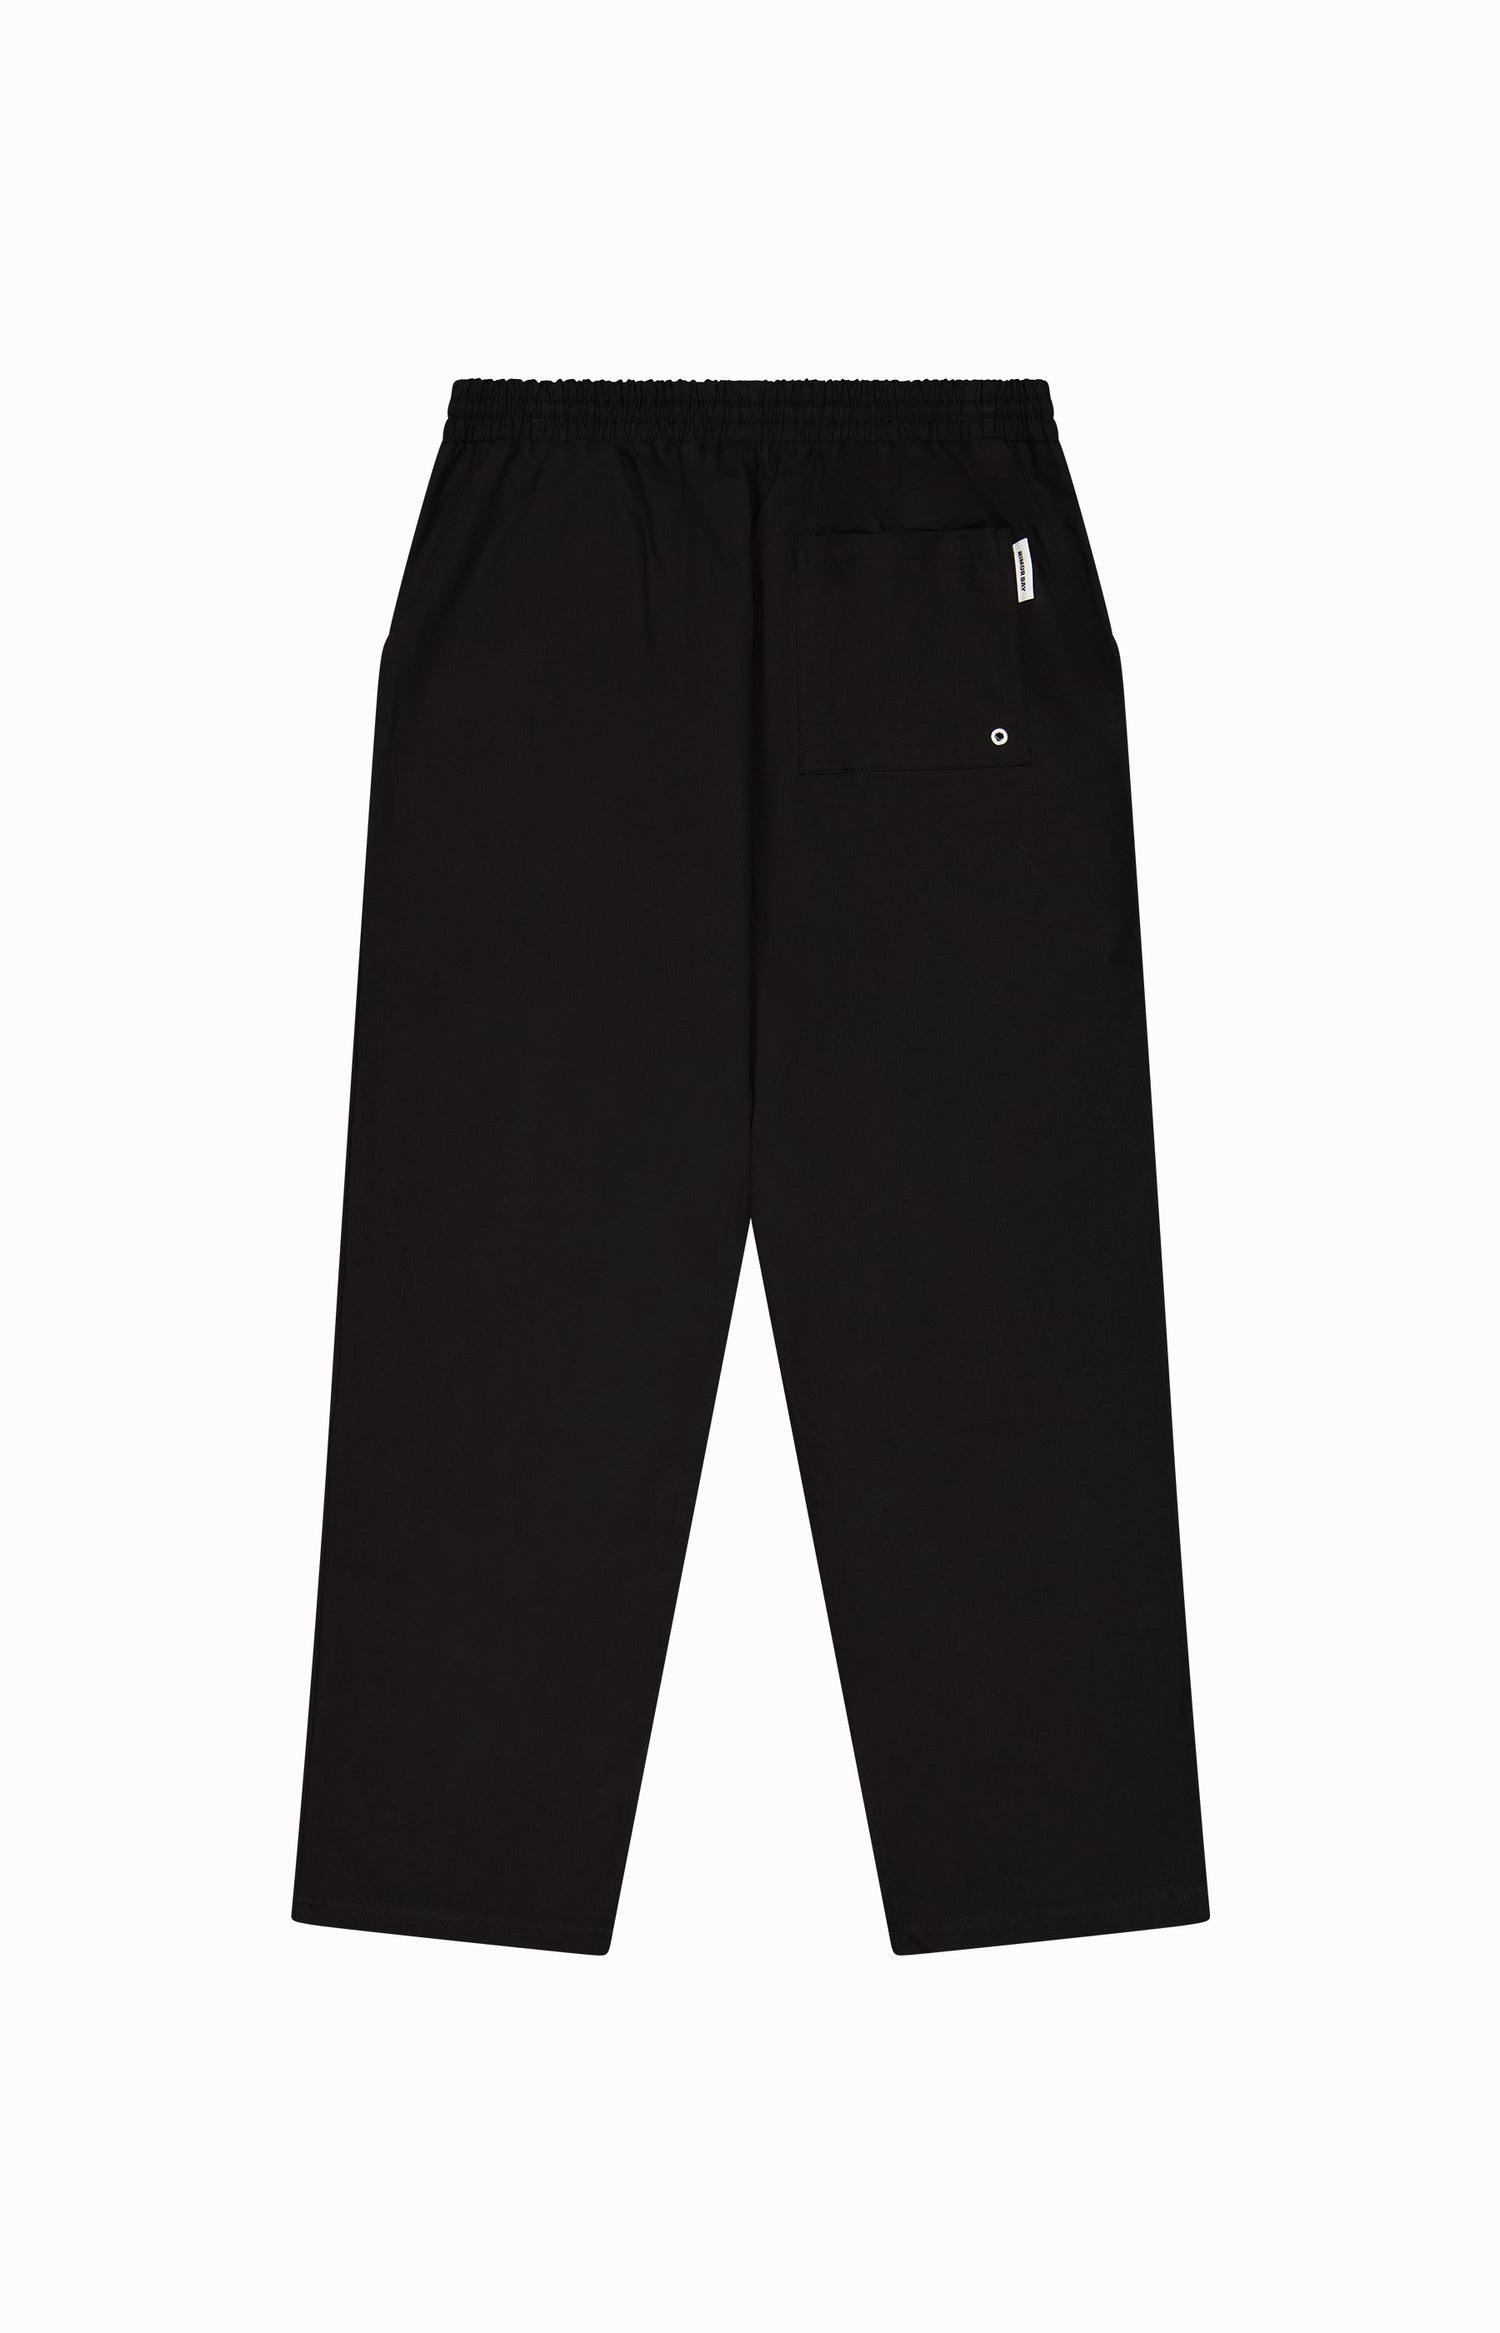 back of black pants with one pocket, and elastic waistband